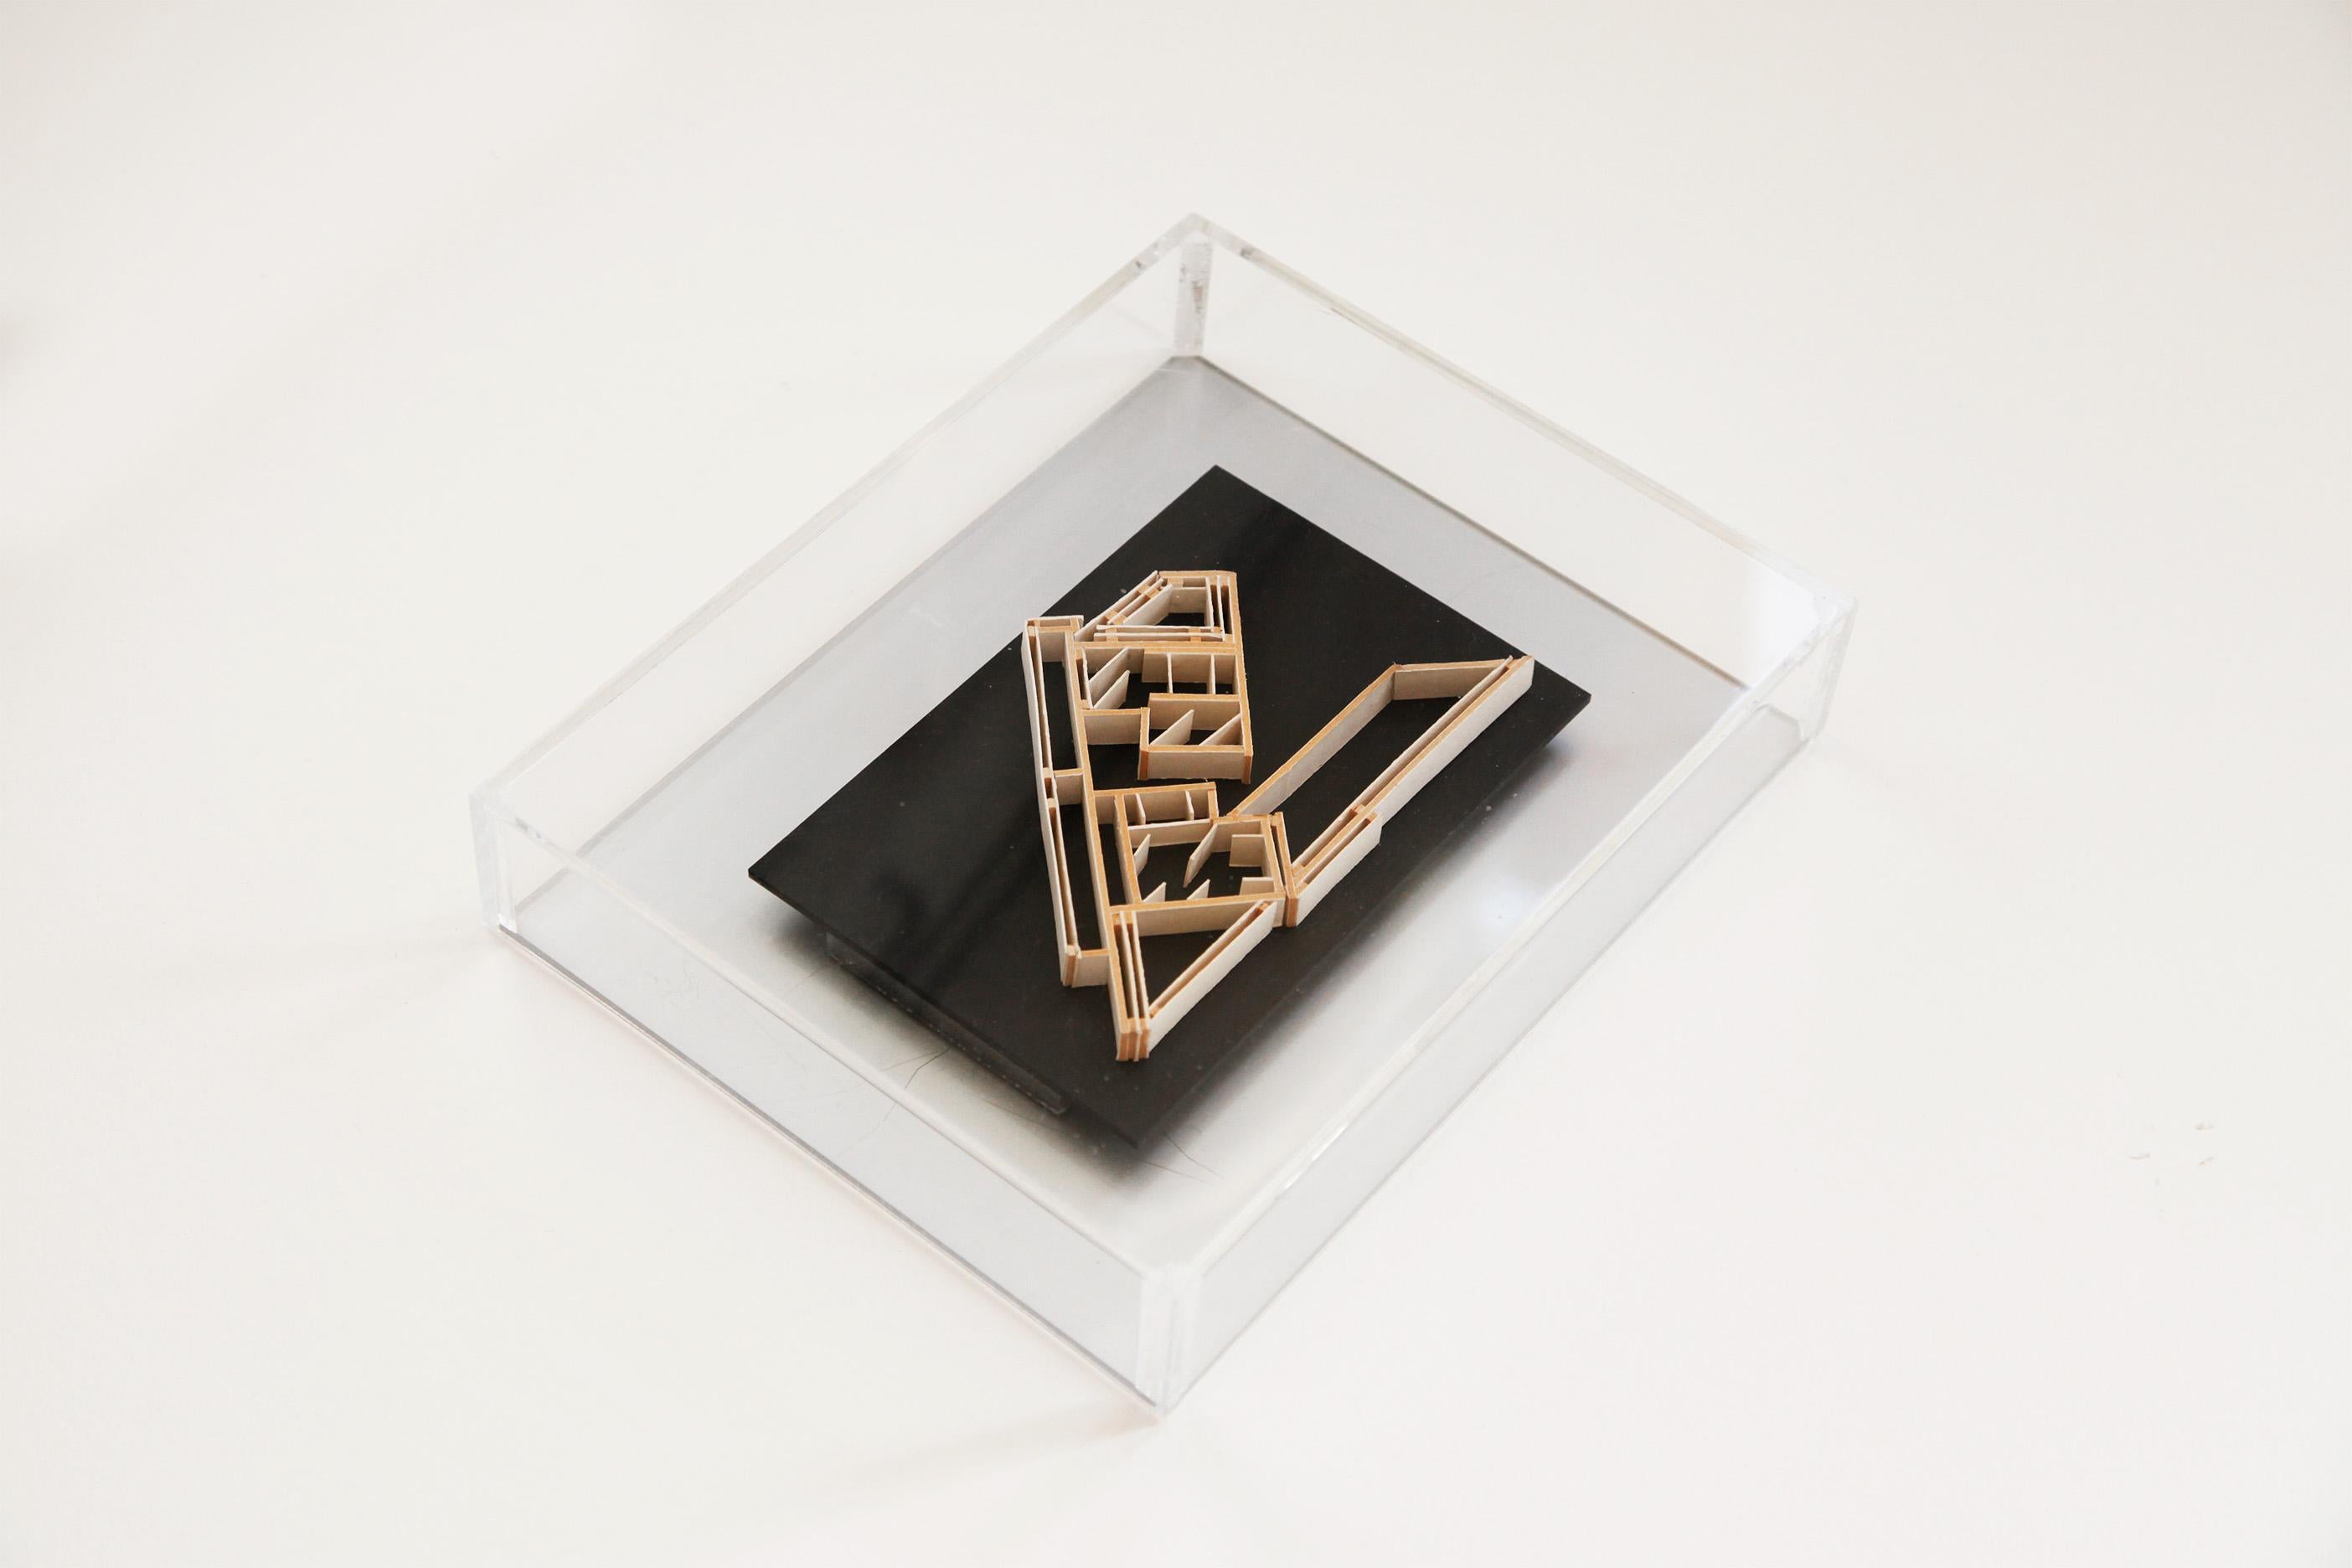 Original Card Construction sculpture made by Eduardo Paolozzi and acquired directly from the artist's studio in 2006. (With supporting provenance). 

Condition: Good - the background plate and acrylic box surrounding the artwork display scratch